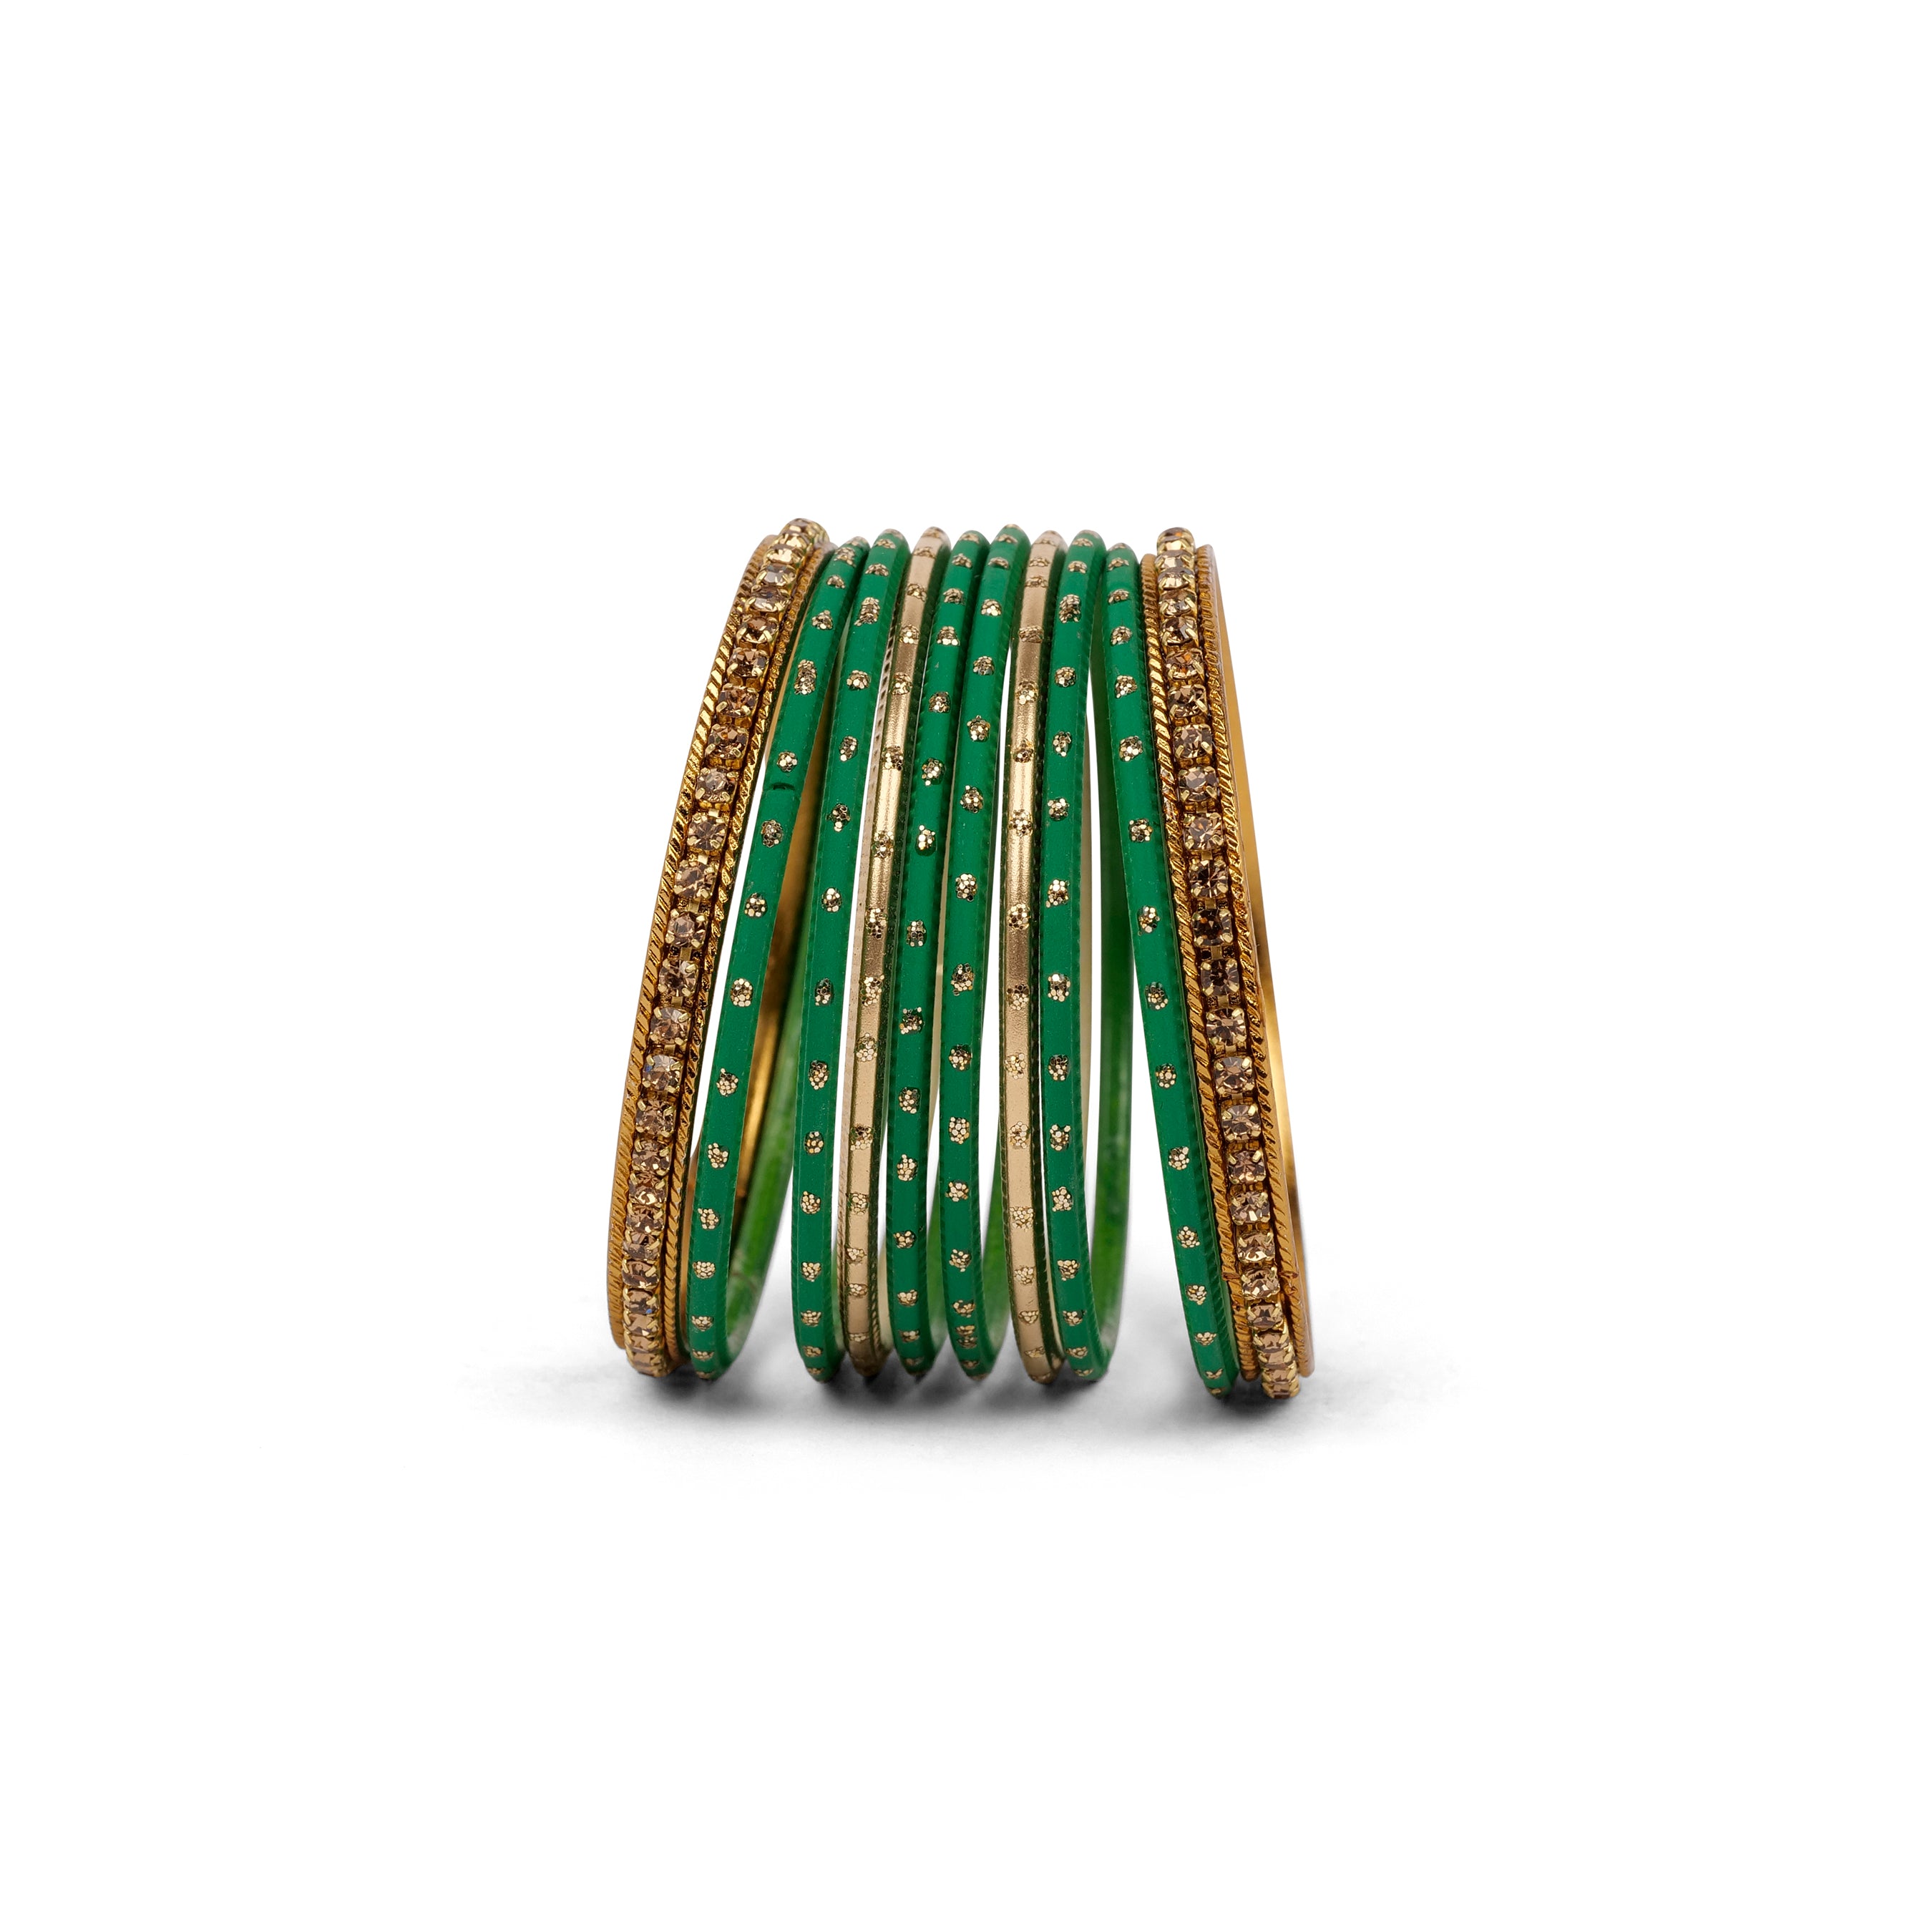 Children's Bangle Set in Green and Antique Gold